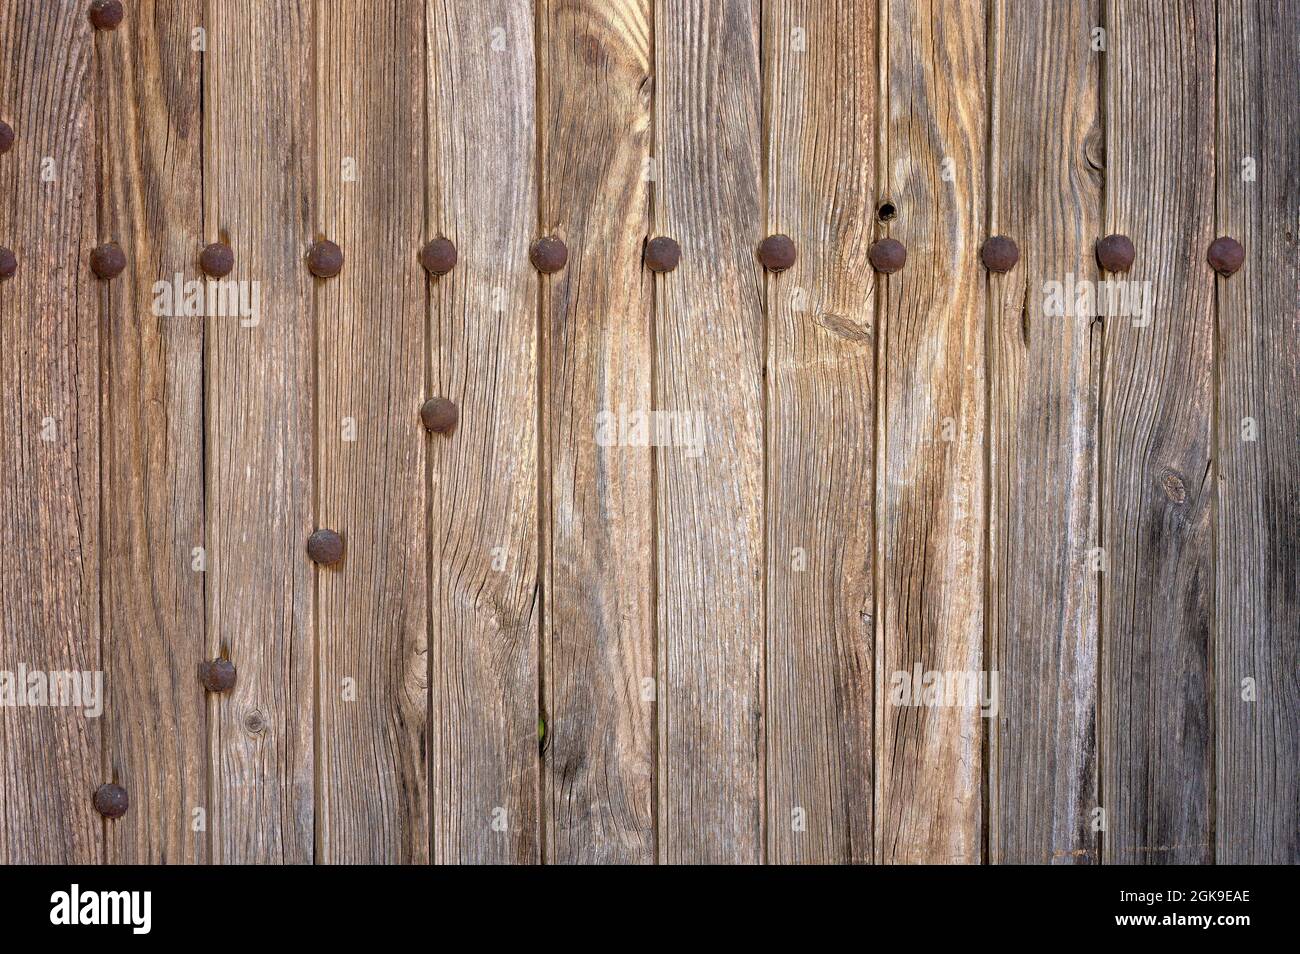 detail of an old wooden door with rusty nails Stock Photo